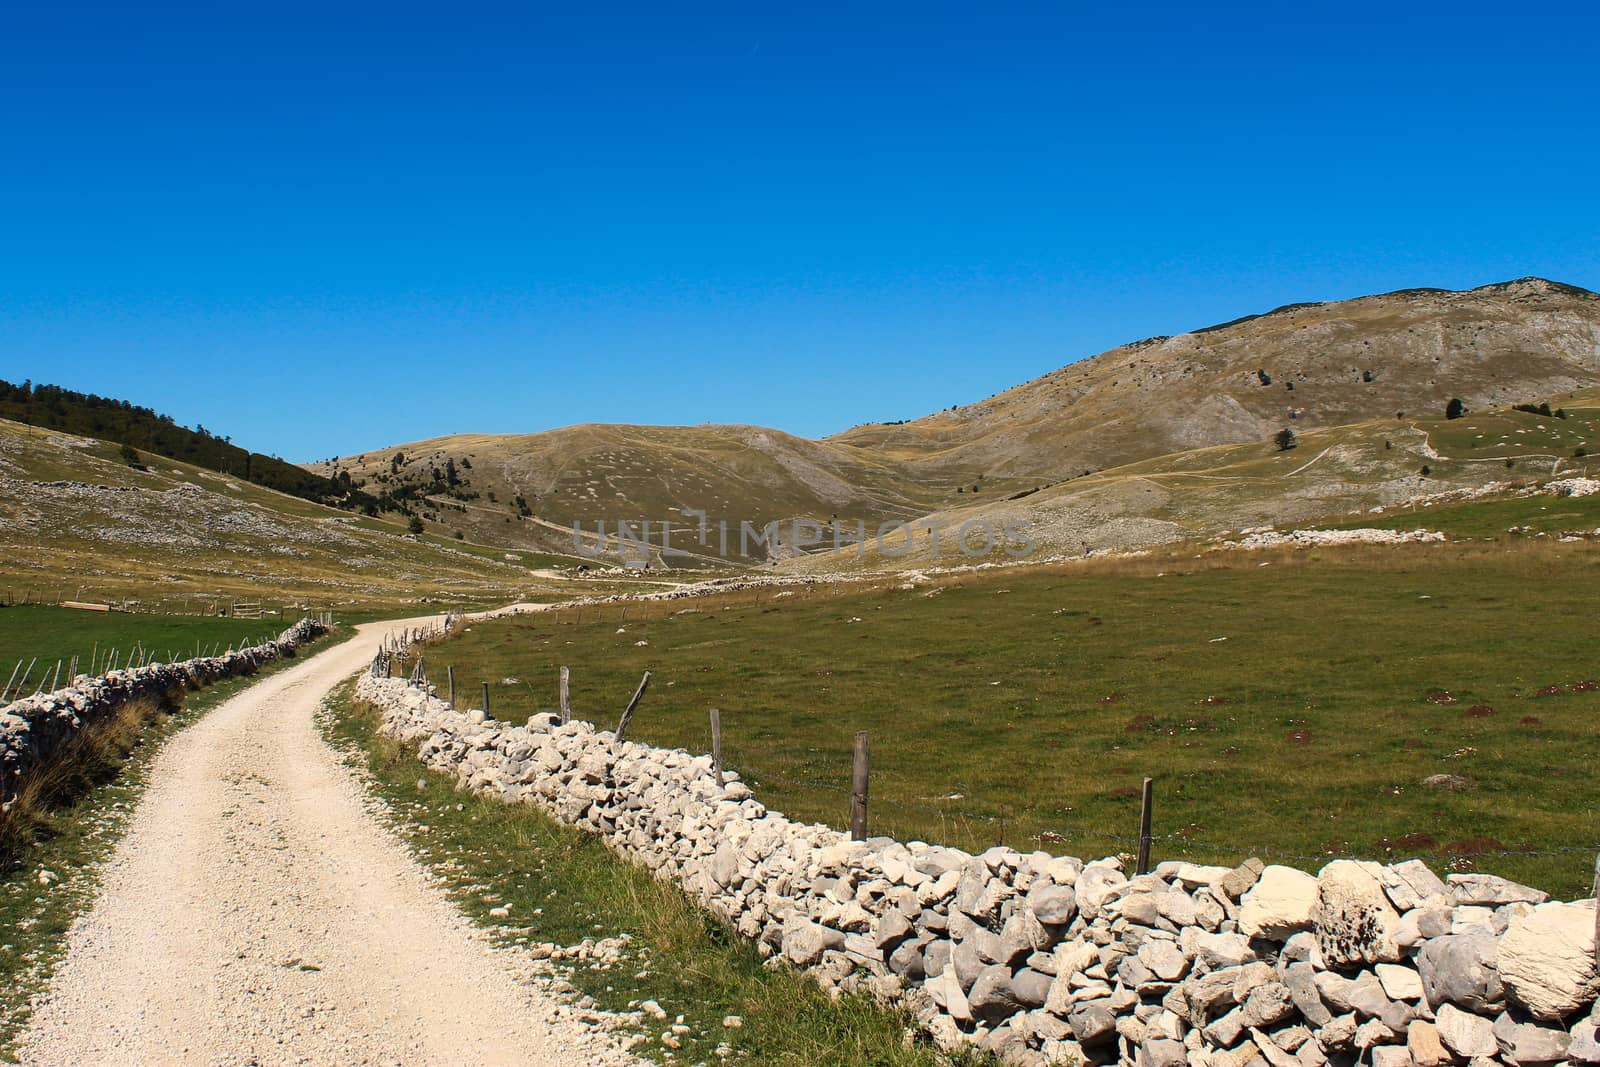 A mountain road surrounded by rocks. Bjelasnica Mountain, Bosnia and Herzegovina.